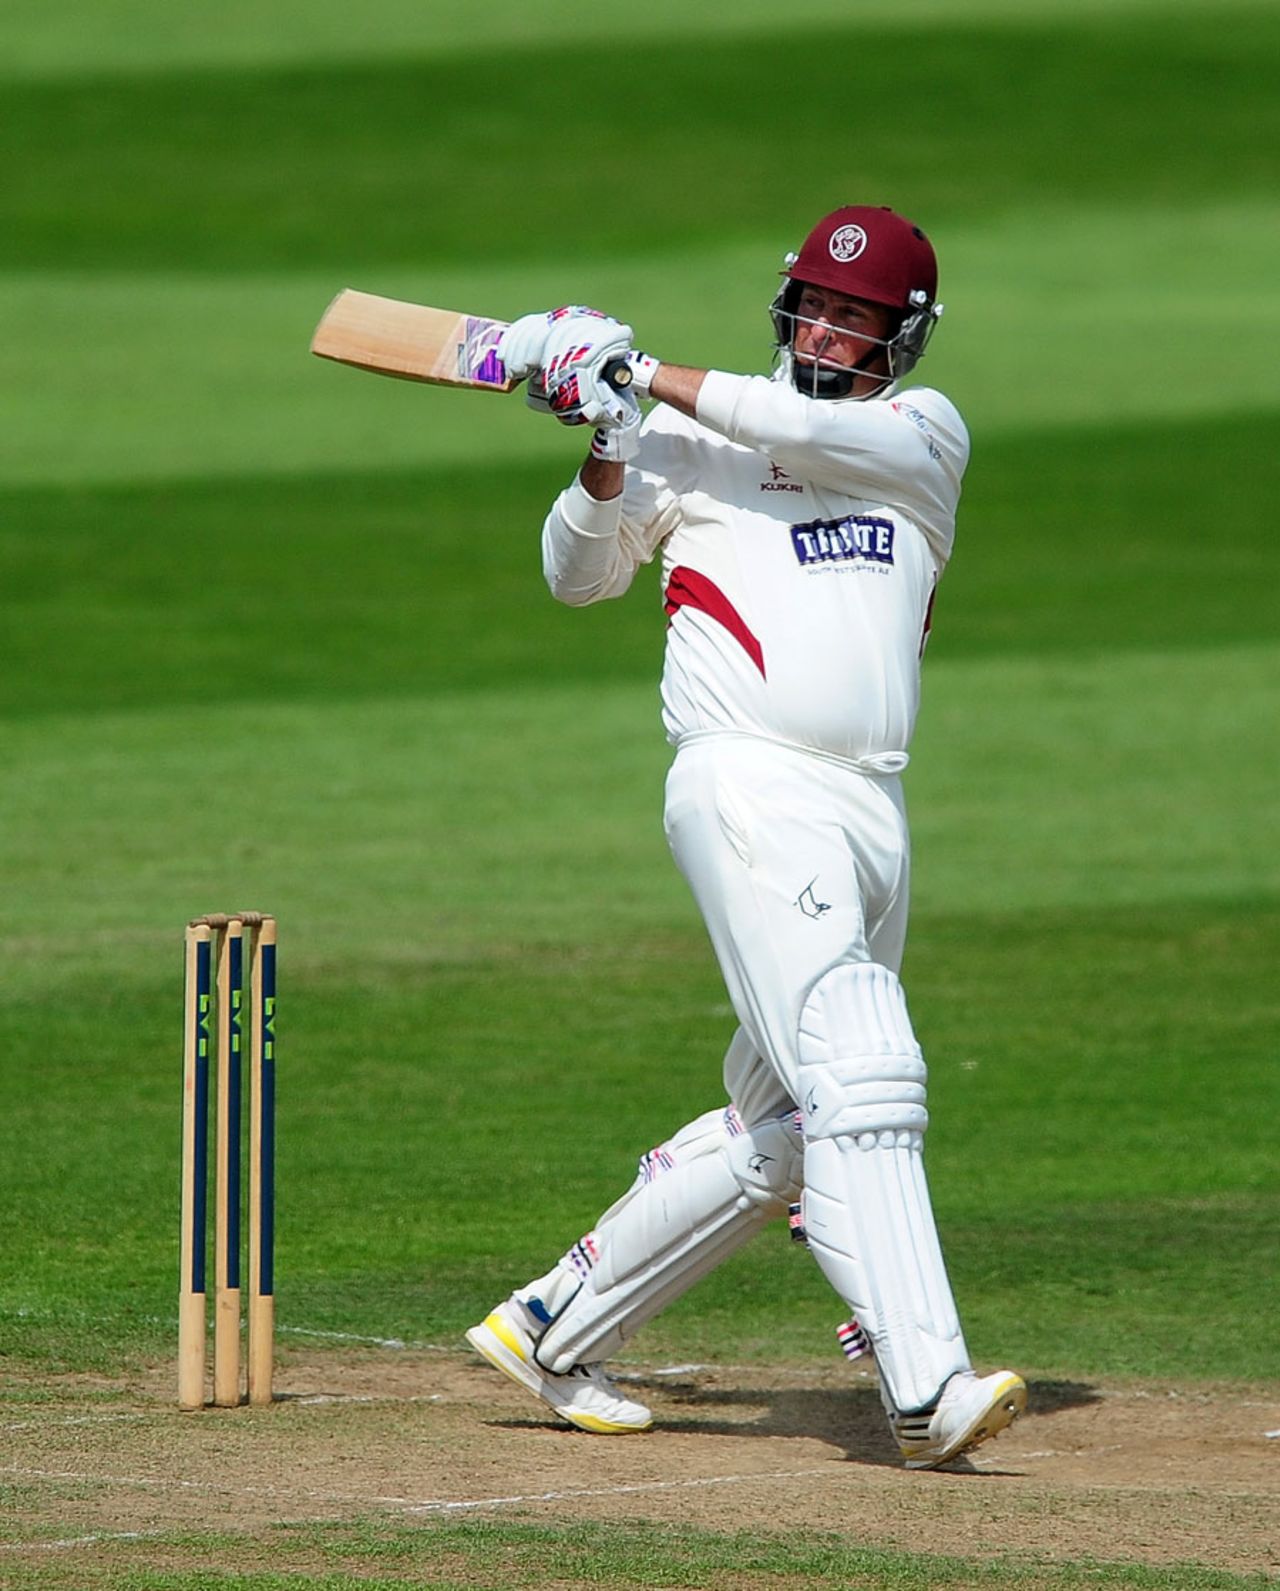 Marcus Trescothick cruised to a century after a tricky start, Somerset v Lancashire, County Championship, Division One, Taunton, 2nd day, June 30, 2014